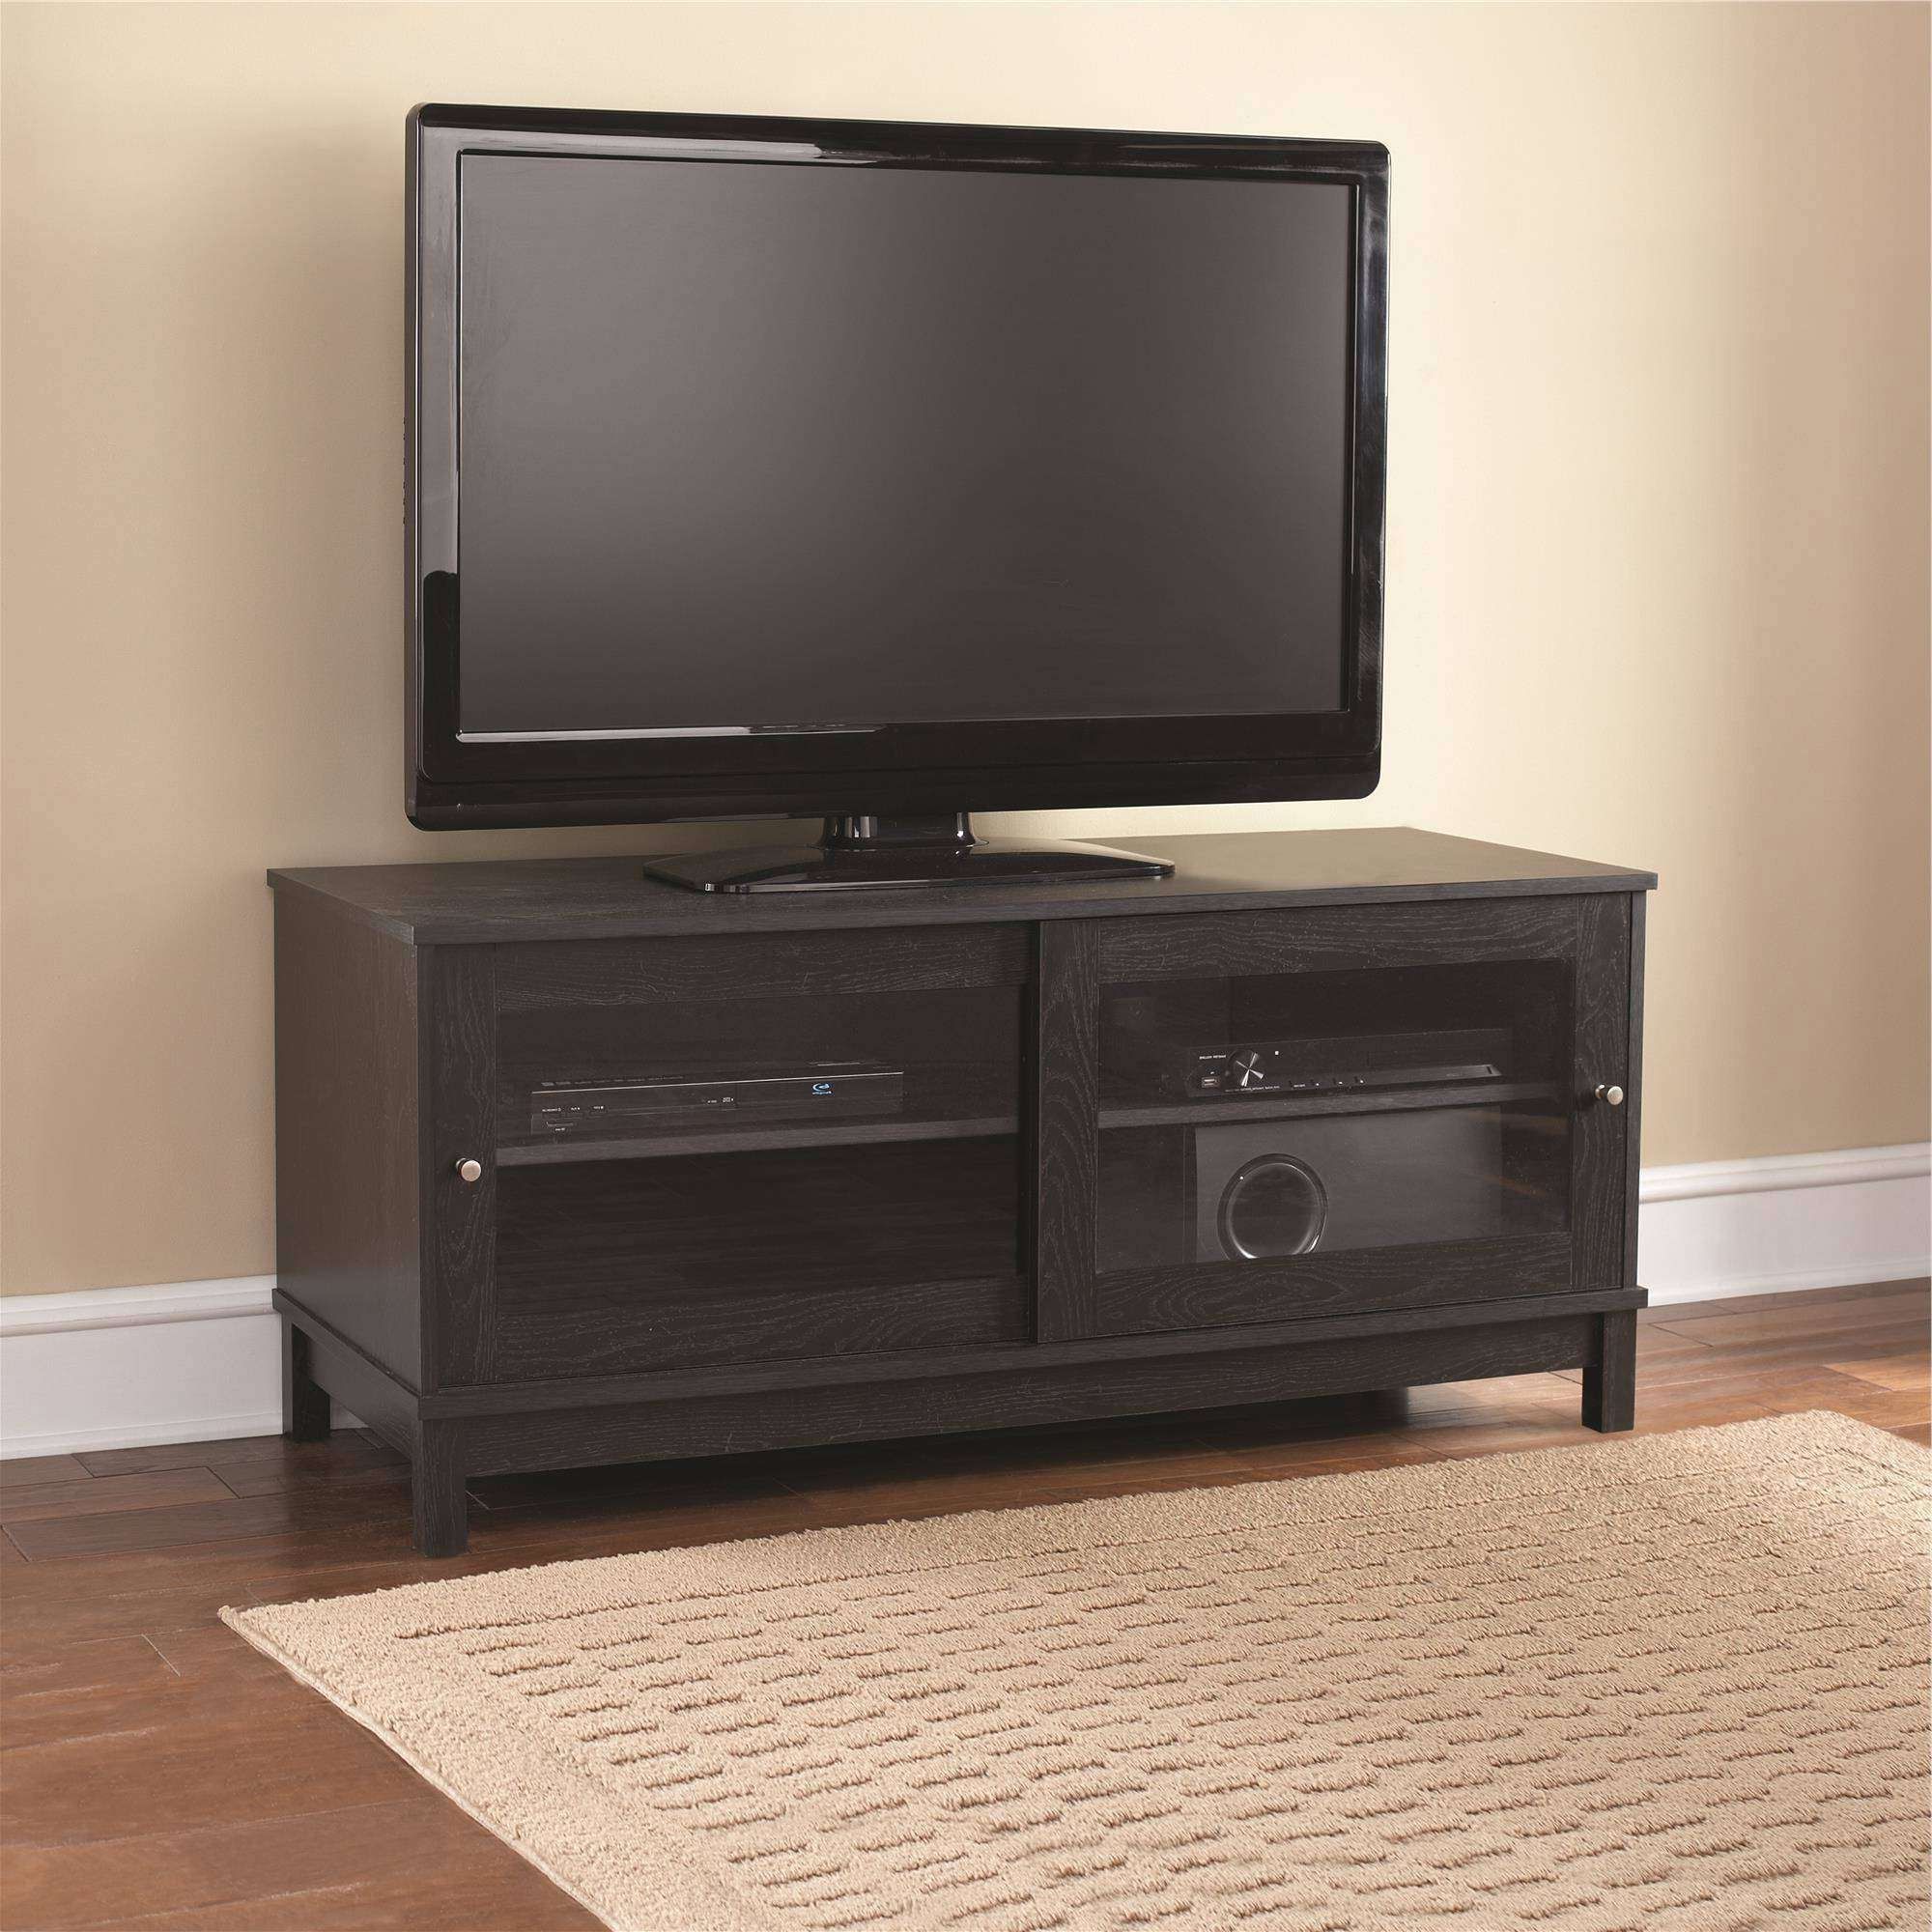 Unique Tv Stands 55 Inch Flat Screen 86 About Remodel Simple Home Intended For Unique Tv Stands (View 16 of 20)